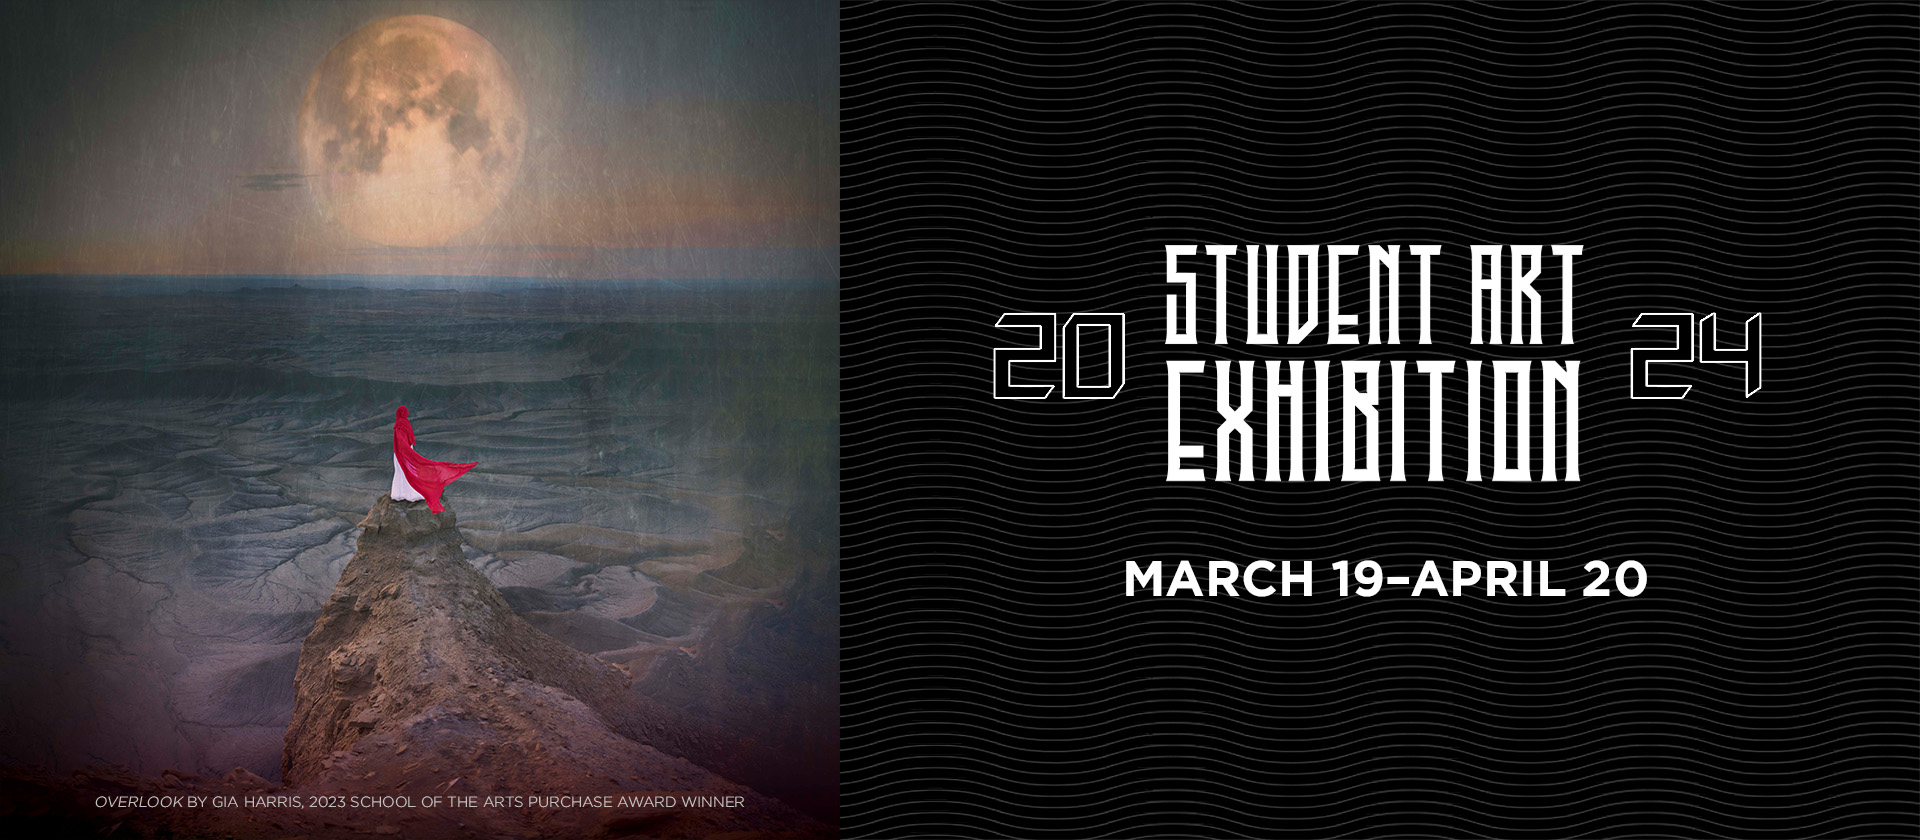 Student Art Exhibition | March 19 - April 20, 2024 | "Overlook" by Gia Harris, 2023 School of the Arts Purchase Award Winner